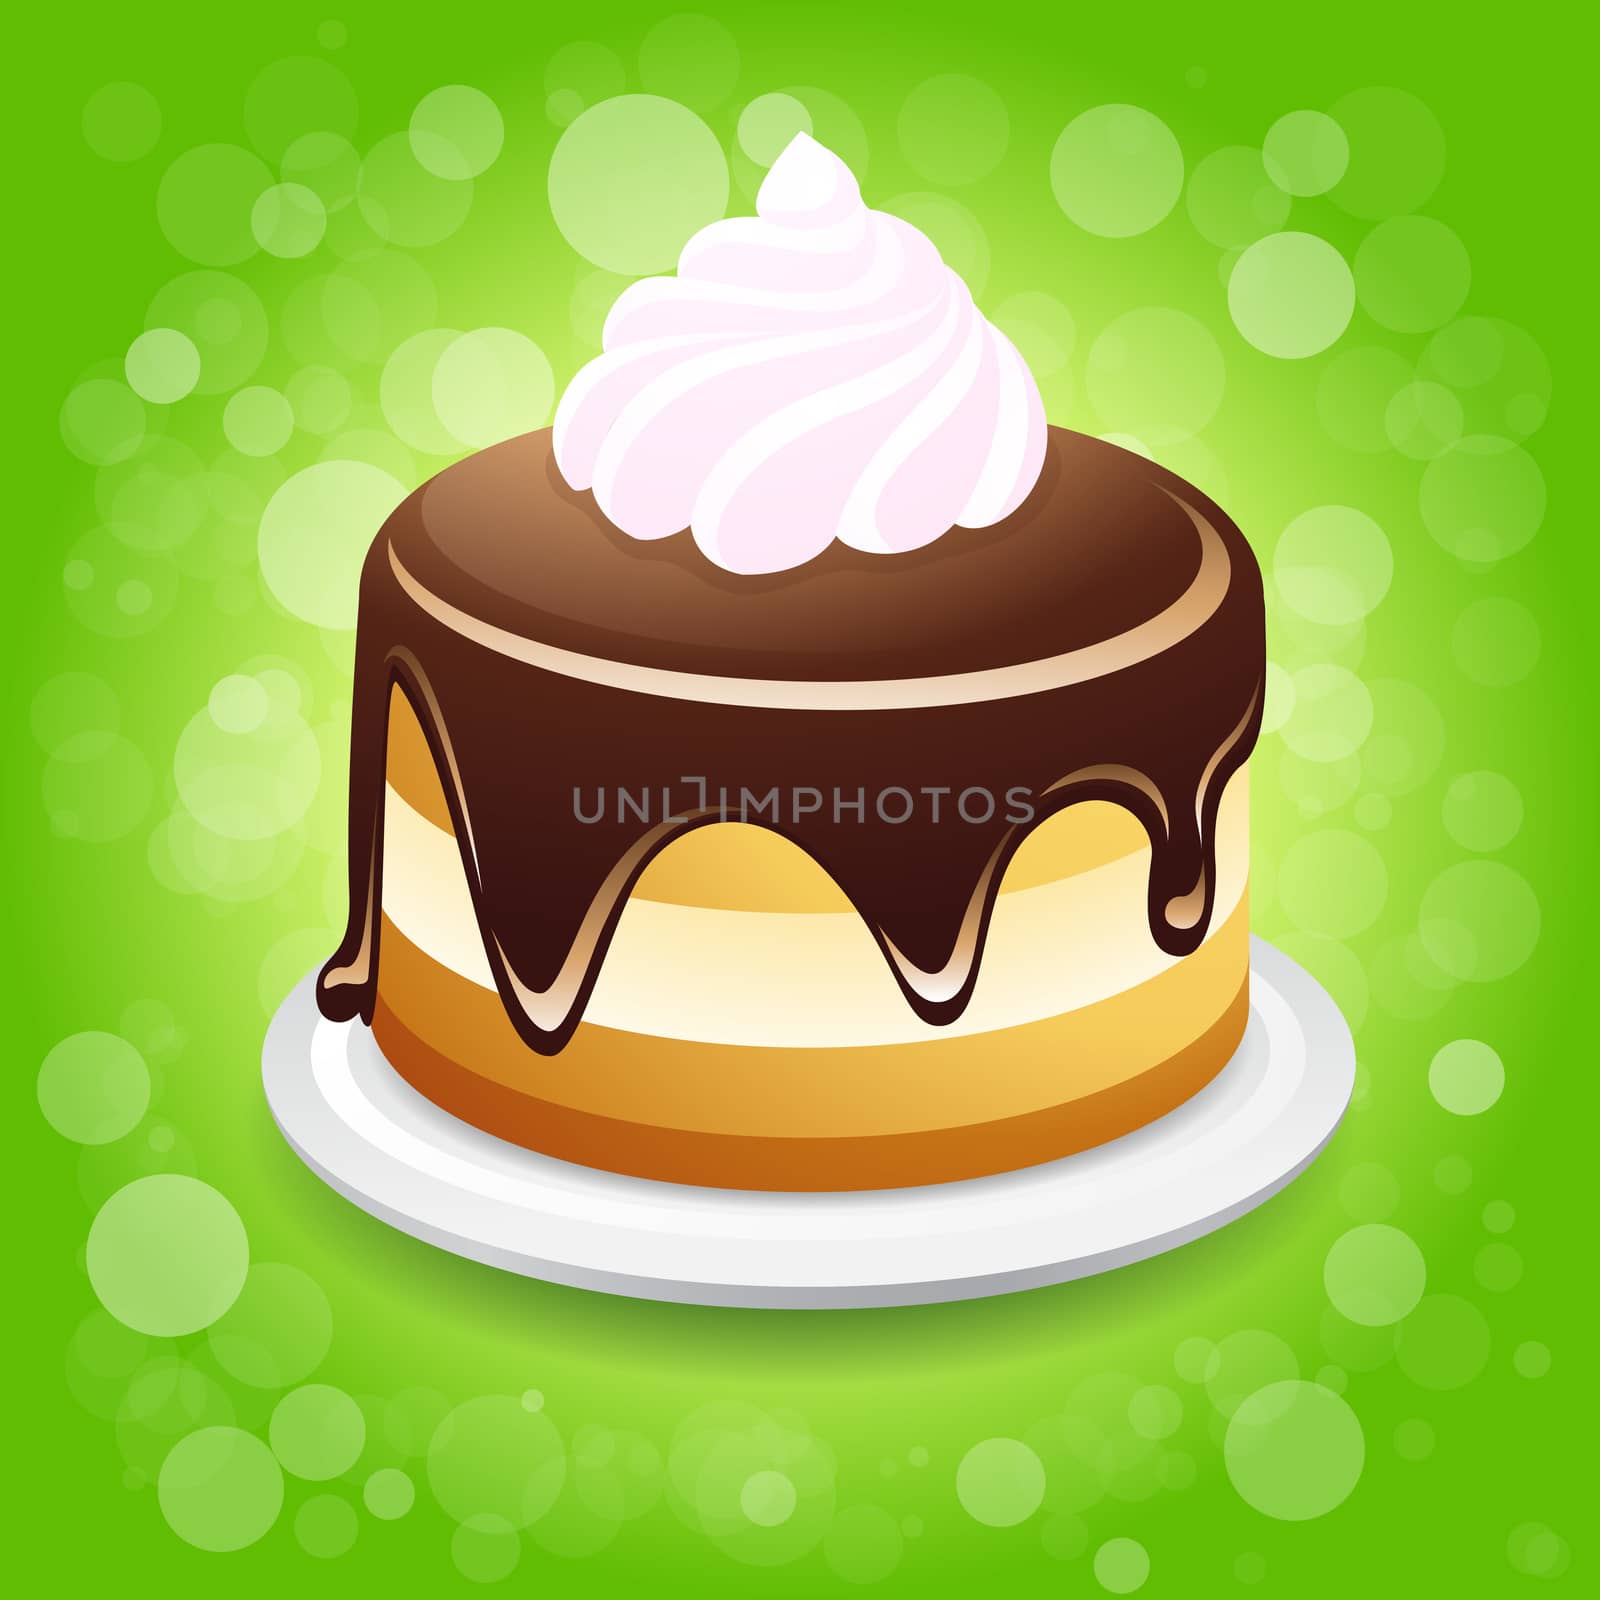 Cake Background by WaD